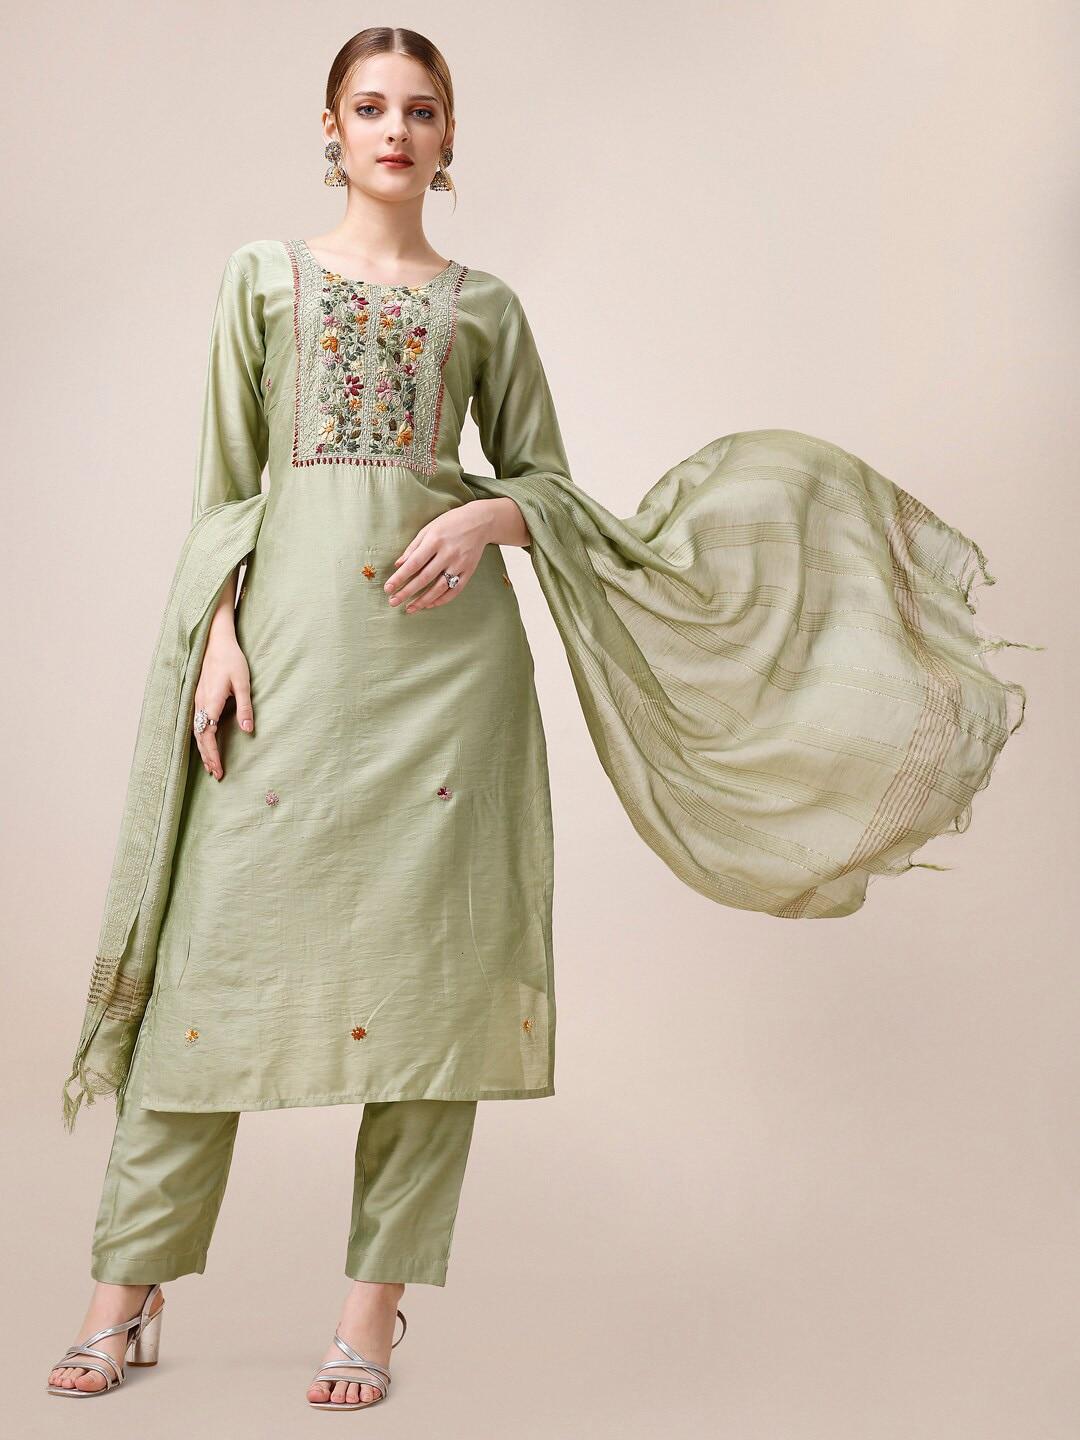 Berrylicious Yoke Design Embroidered Chanderi Cotton Kurta with Trousers & With Dupatta